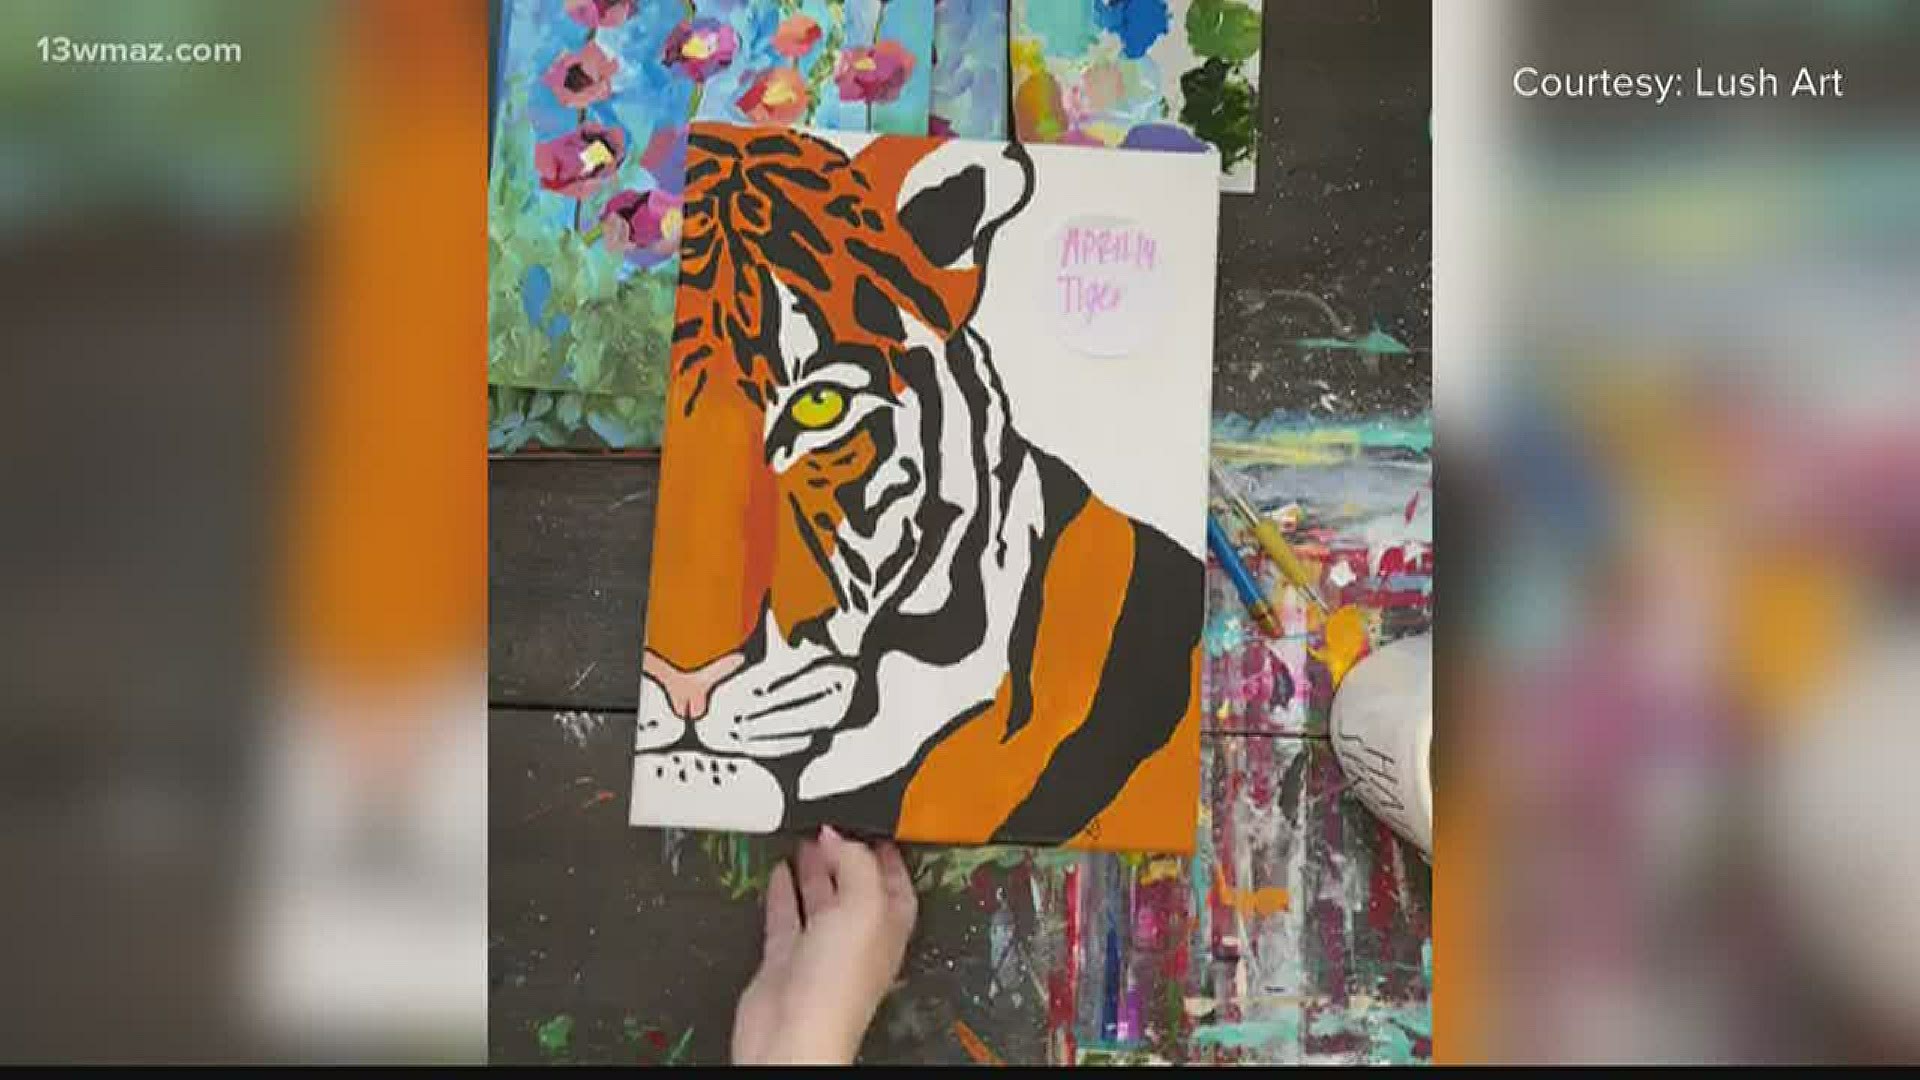 With in-person art classes cancelled, Lush Art in Warner Robins is bringing their painting classes to your computer screen.